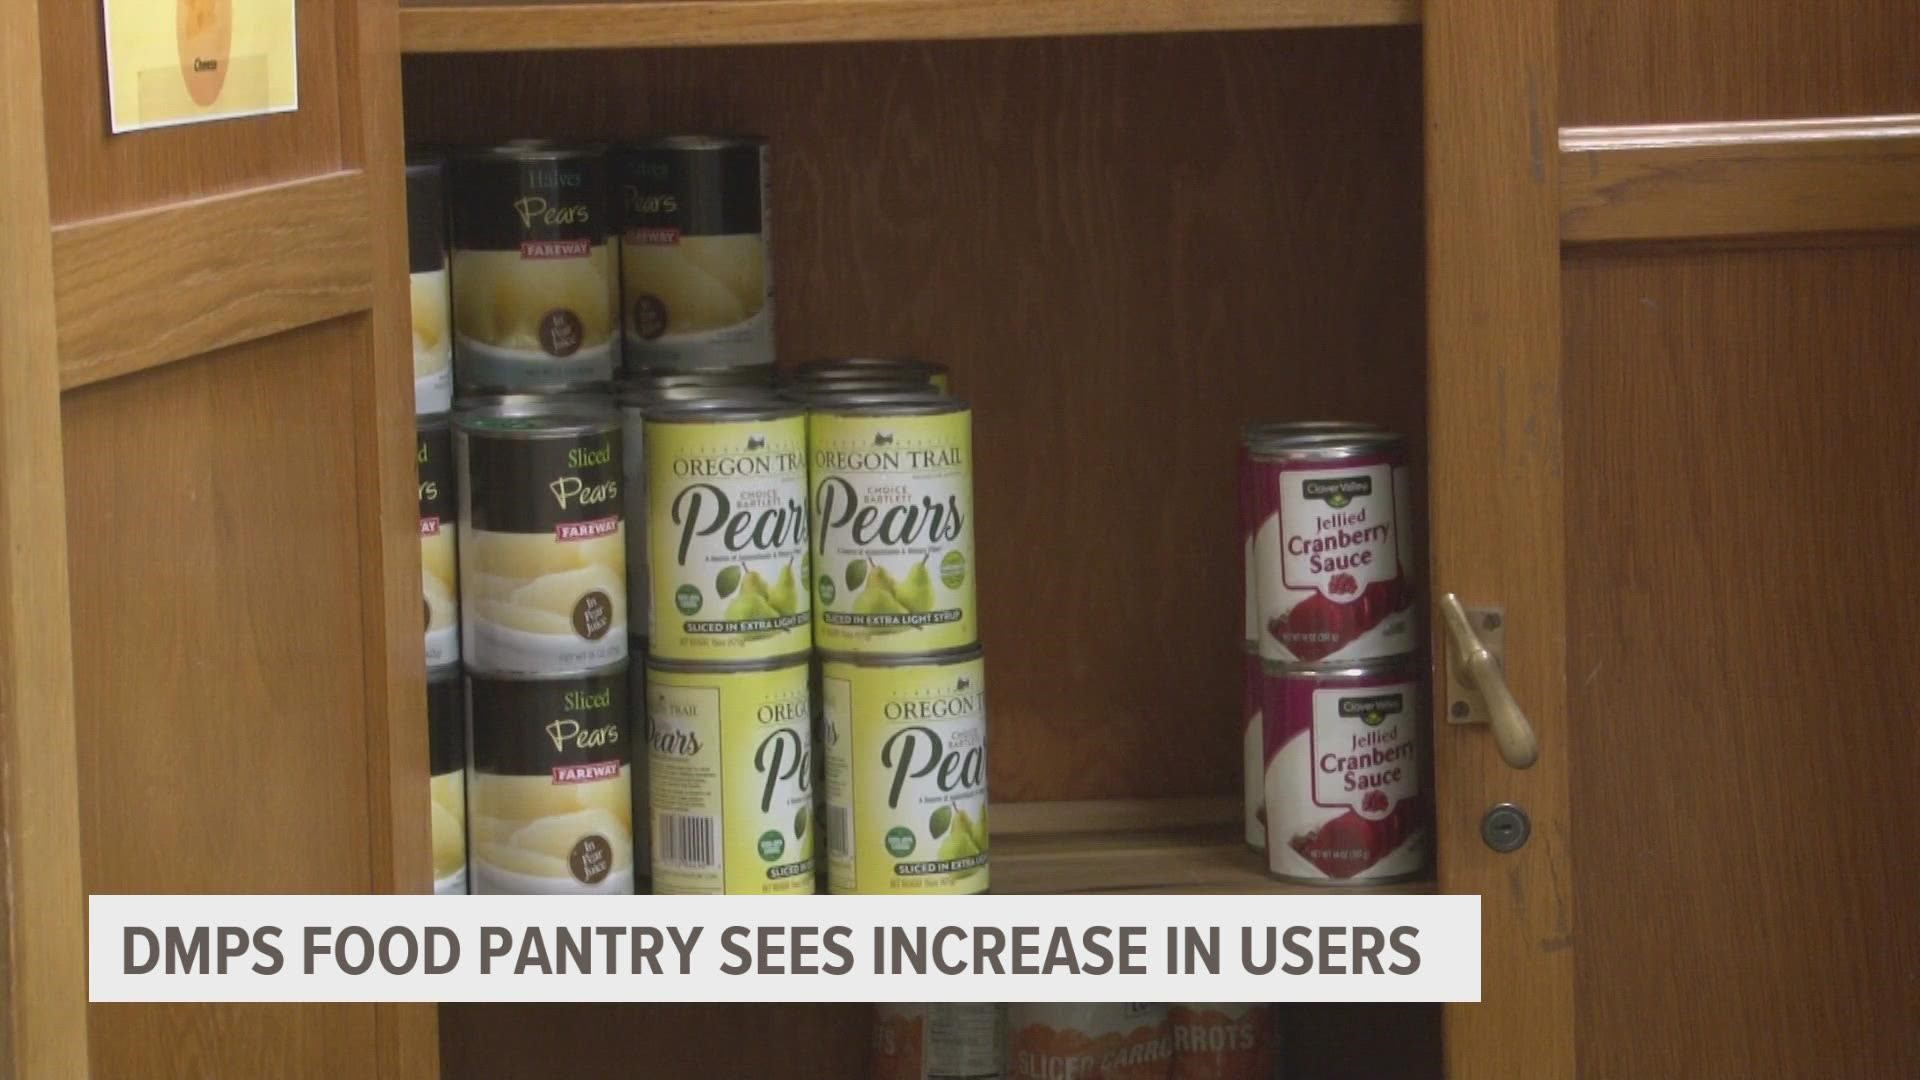 The pantry expanded from just serving students to serving the whole community back in December.